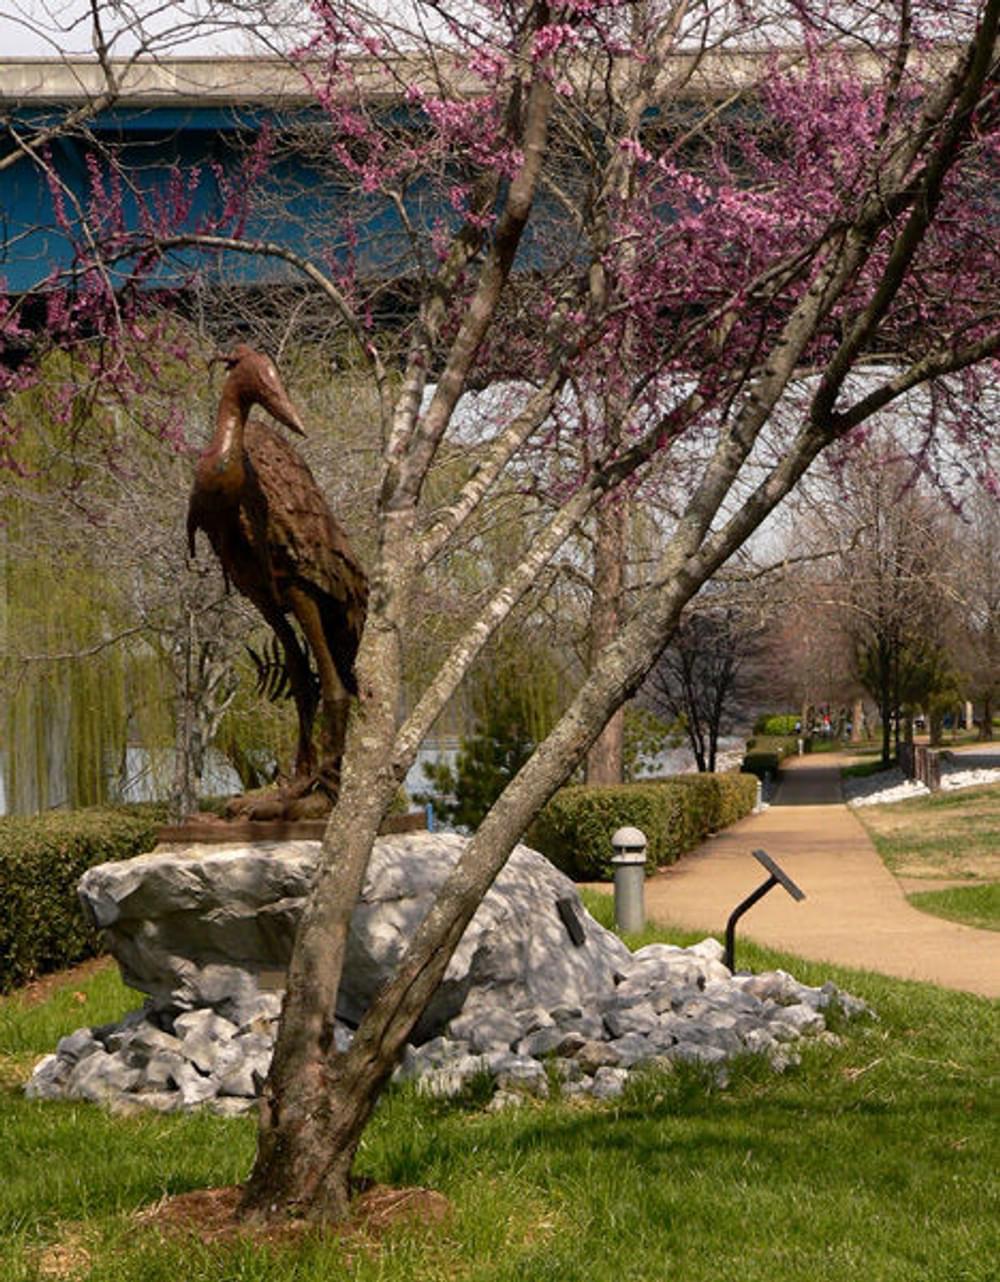 Heron sculpture at Fishing Park on the Tennessee Riverpark in Chattanooga, TN: "Great Blue Heron with Olive Branch" by artist Jack Denton, 2000. C. B. Robinson Bridge is in the background